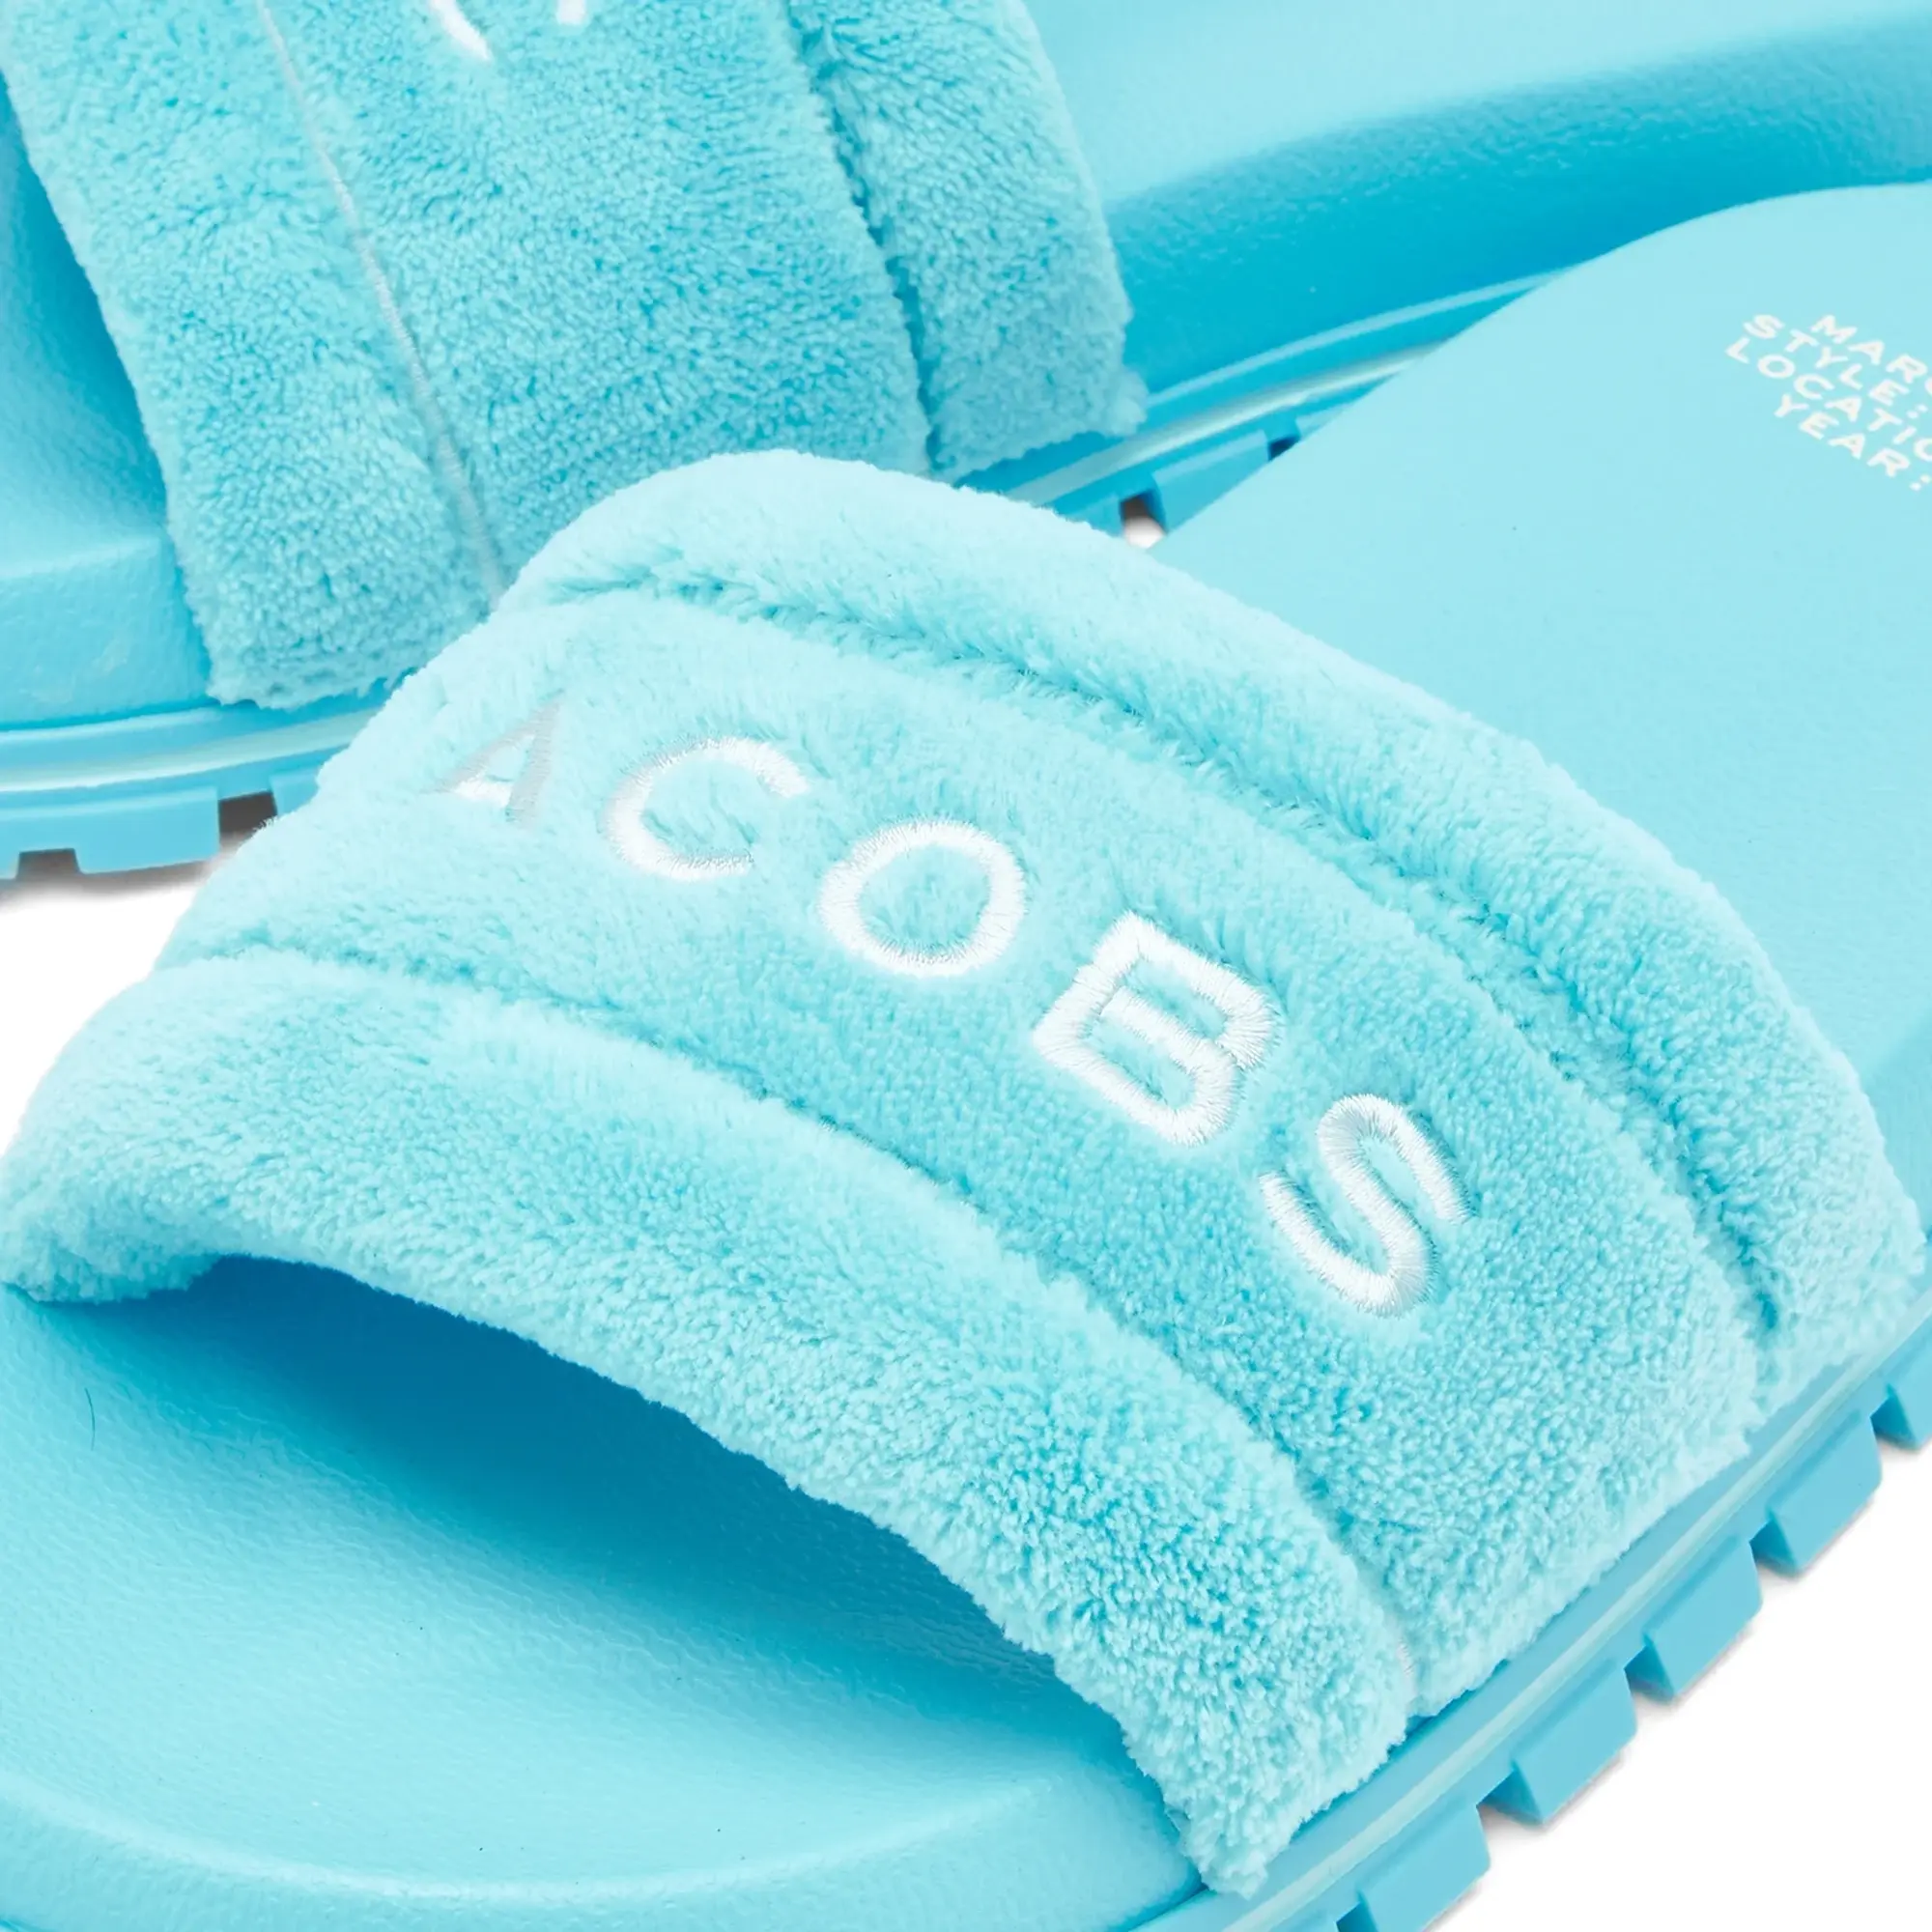 Marc Jacobs Women's The Terry Slide Pool